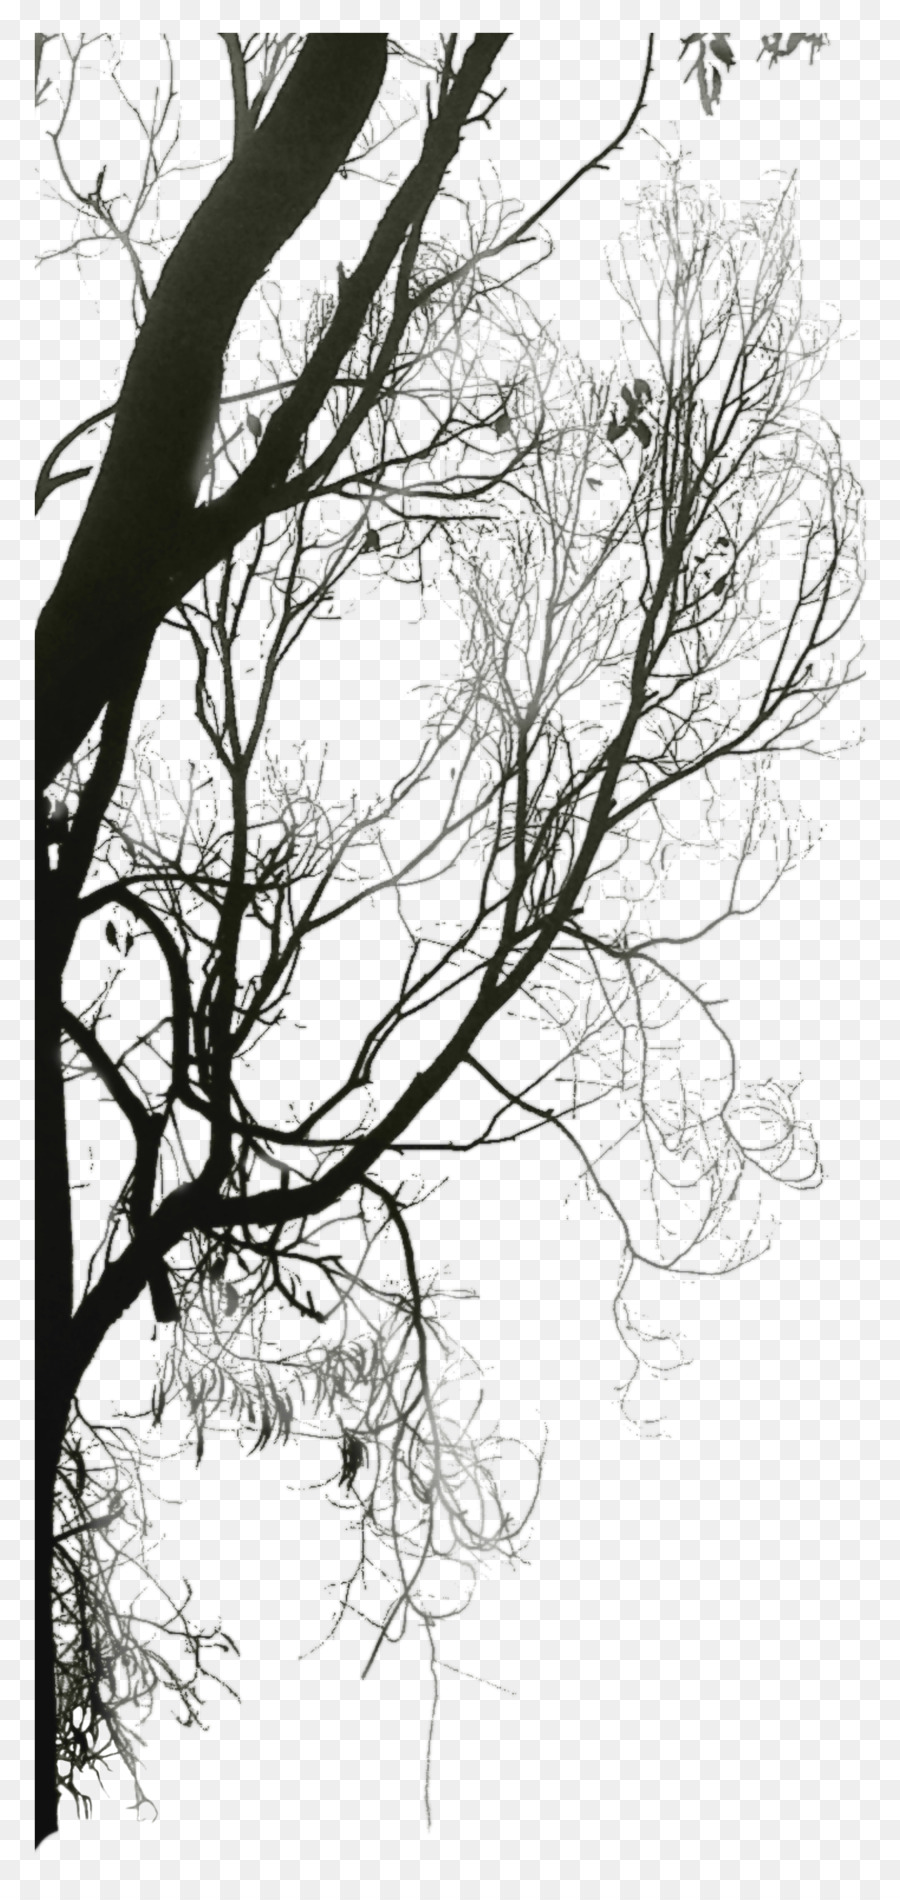 Black and white Twig Download Tree - Trees Silhouette png download - 1371*2876 - Free Transparent Black And White png Download.